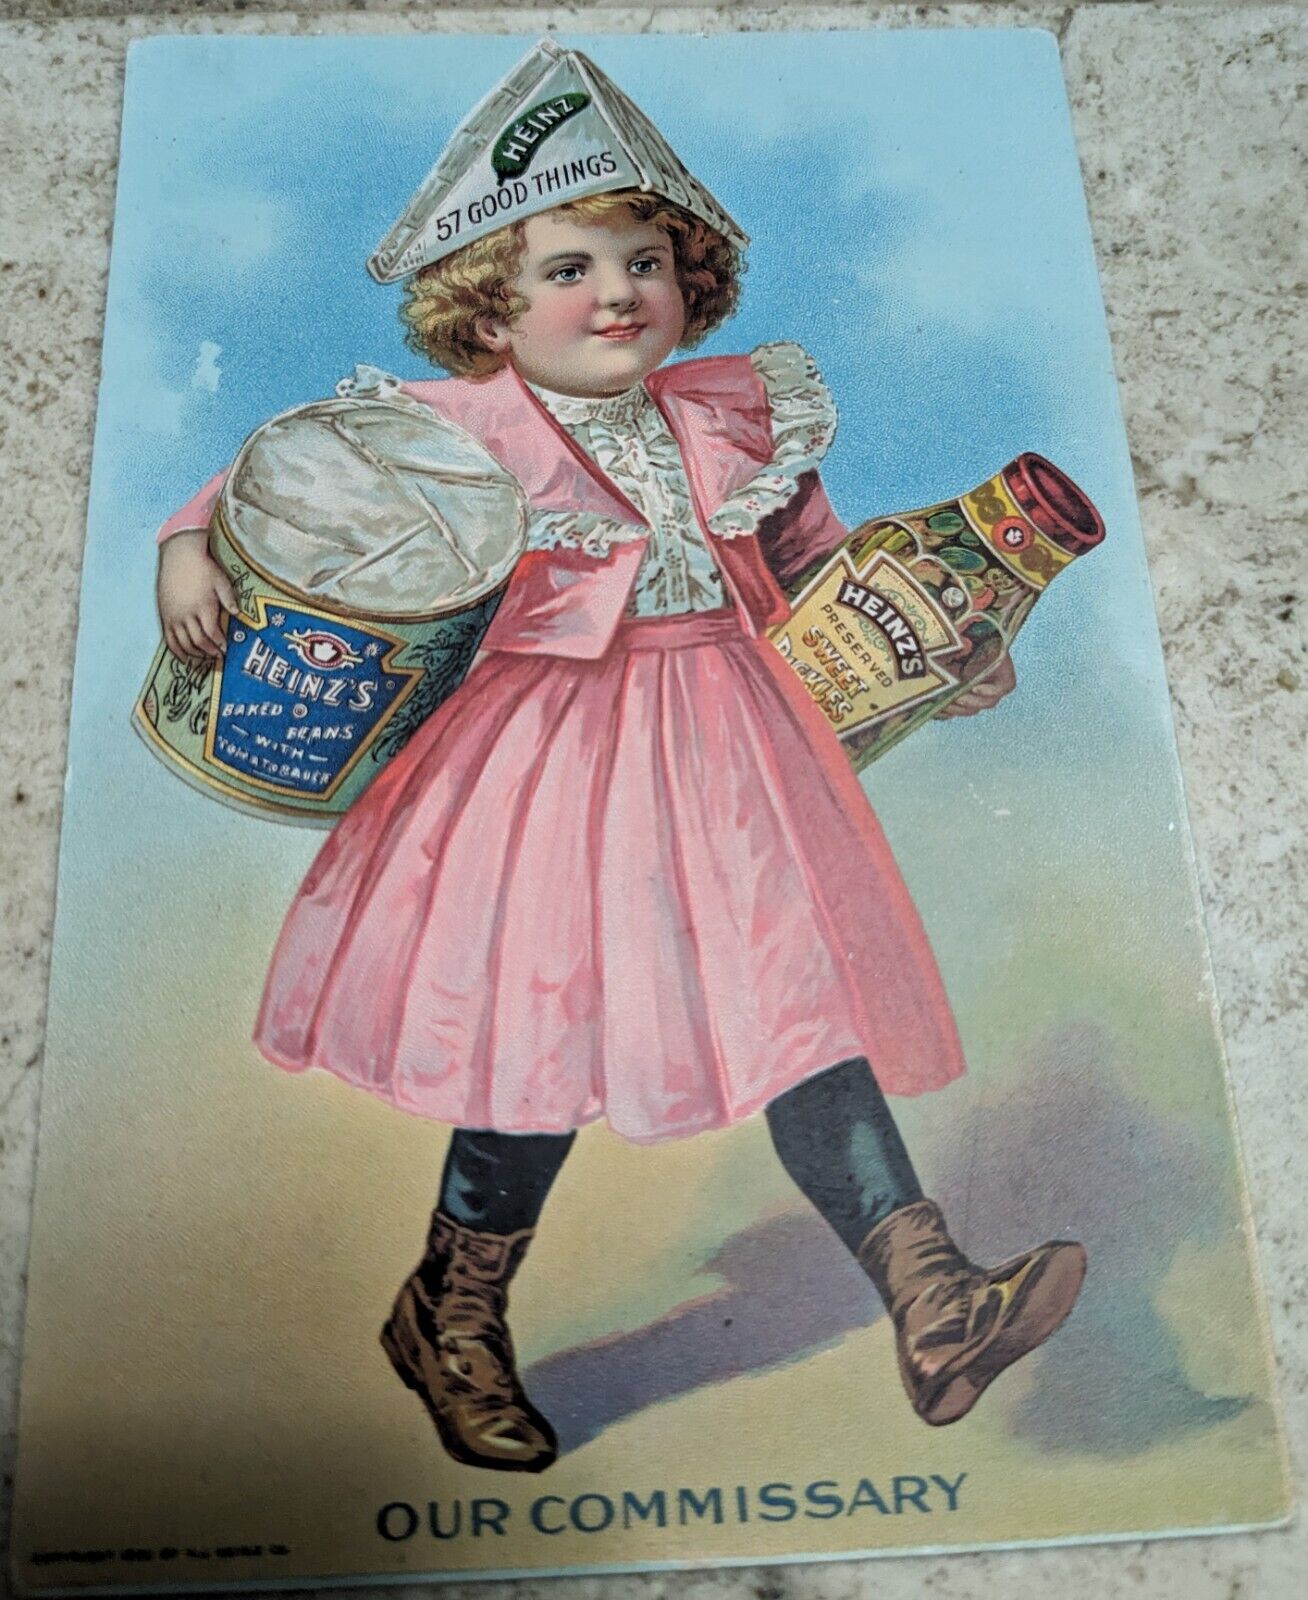 *VERY RARE* VICT. TRADE CARD HEINZ SWEET PICKLES BAKED BEANS OUR COMMISSARY N.J.